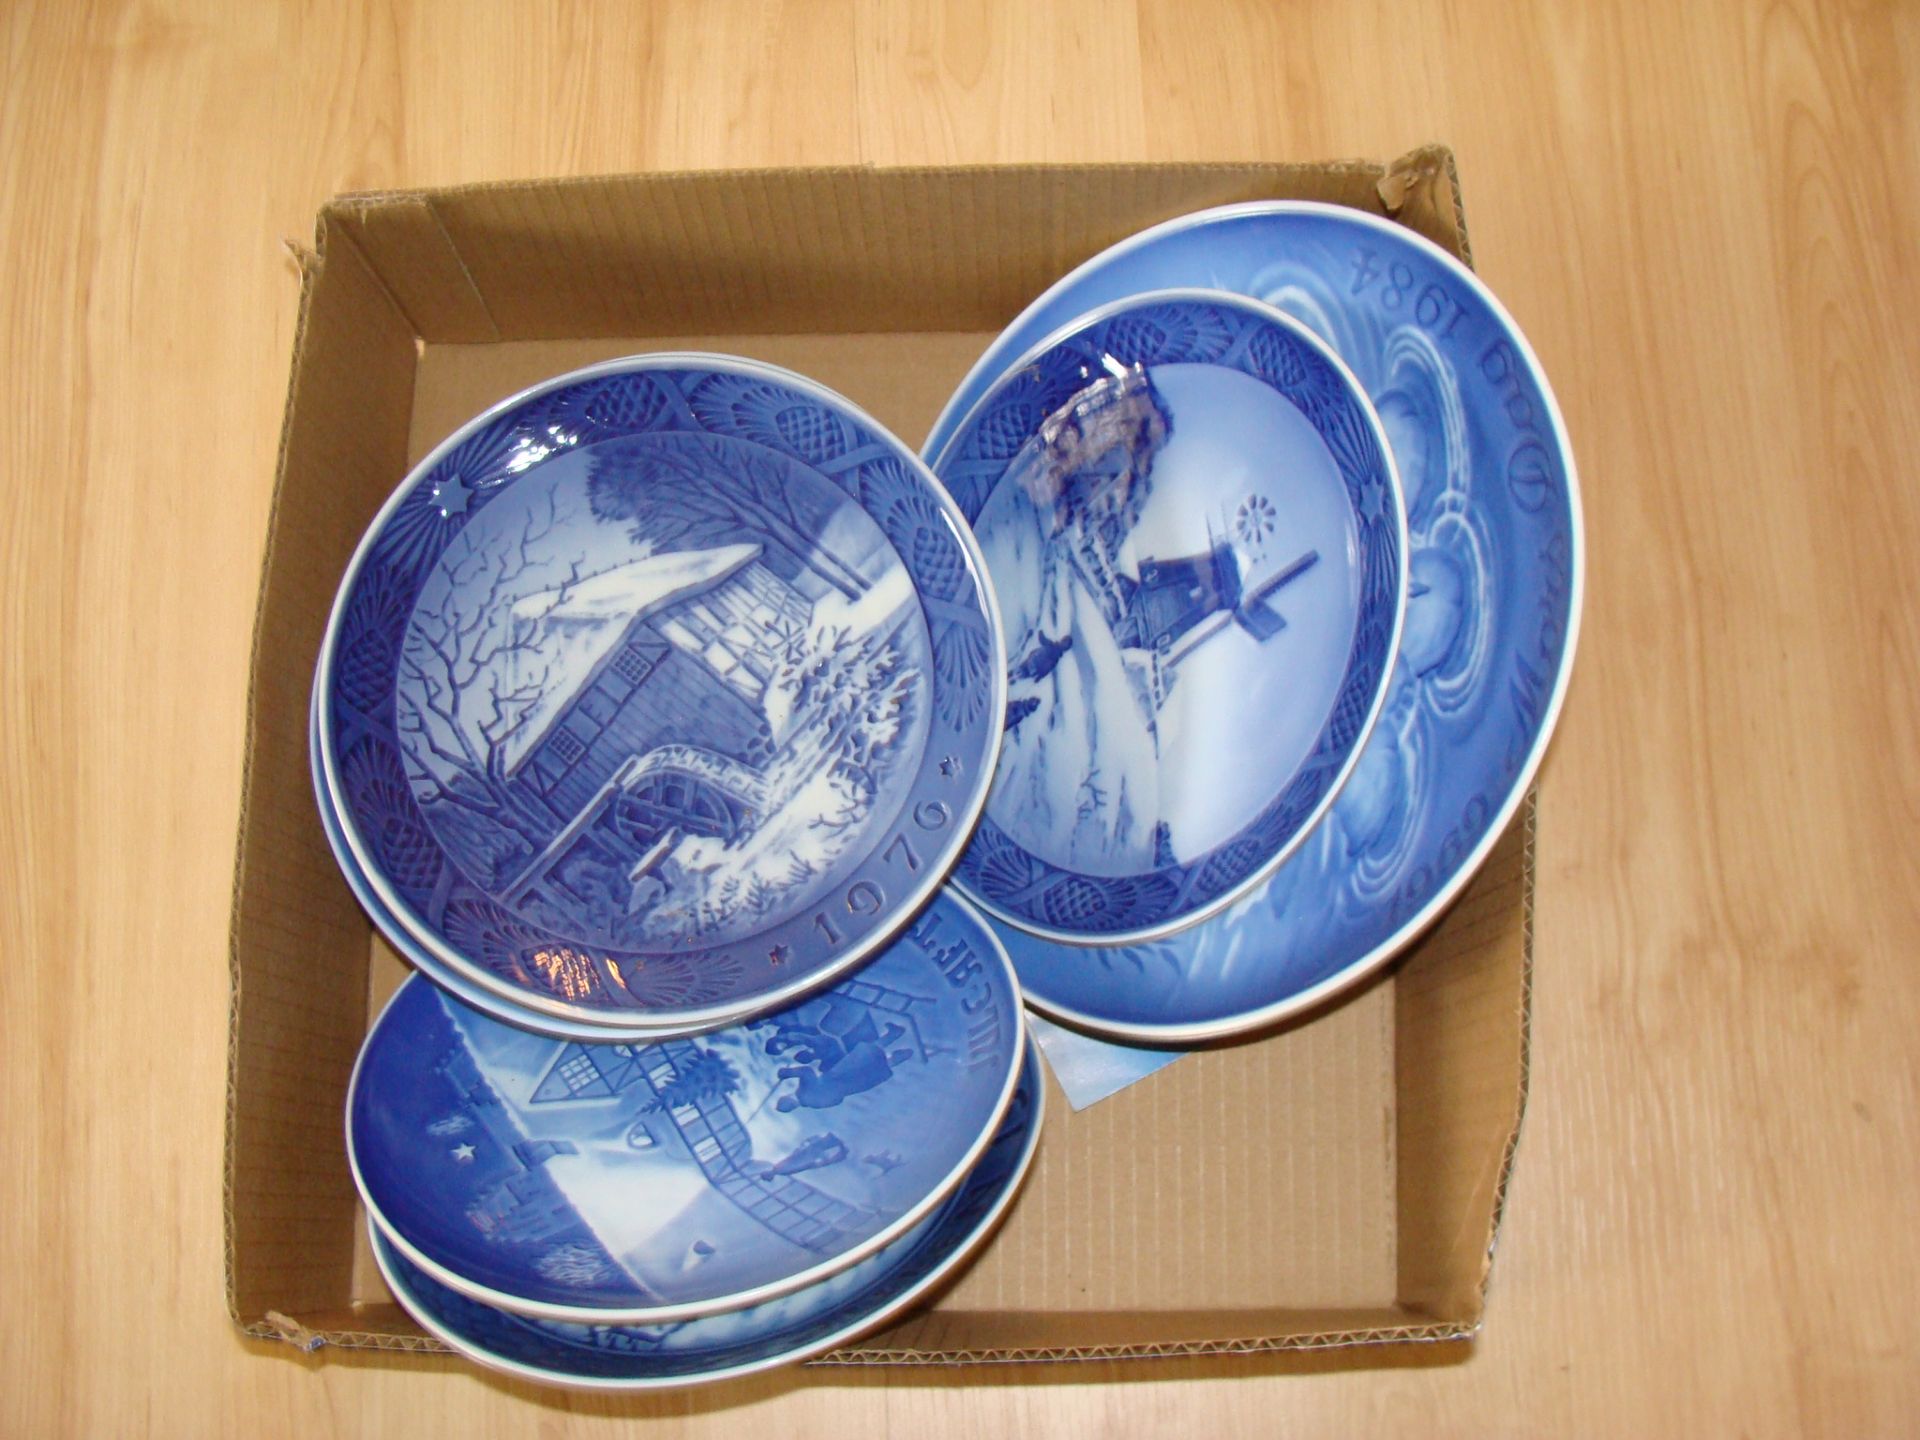 Group of B&G and Royal Copenhagen Collector Plates